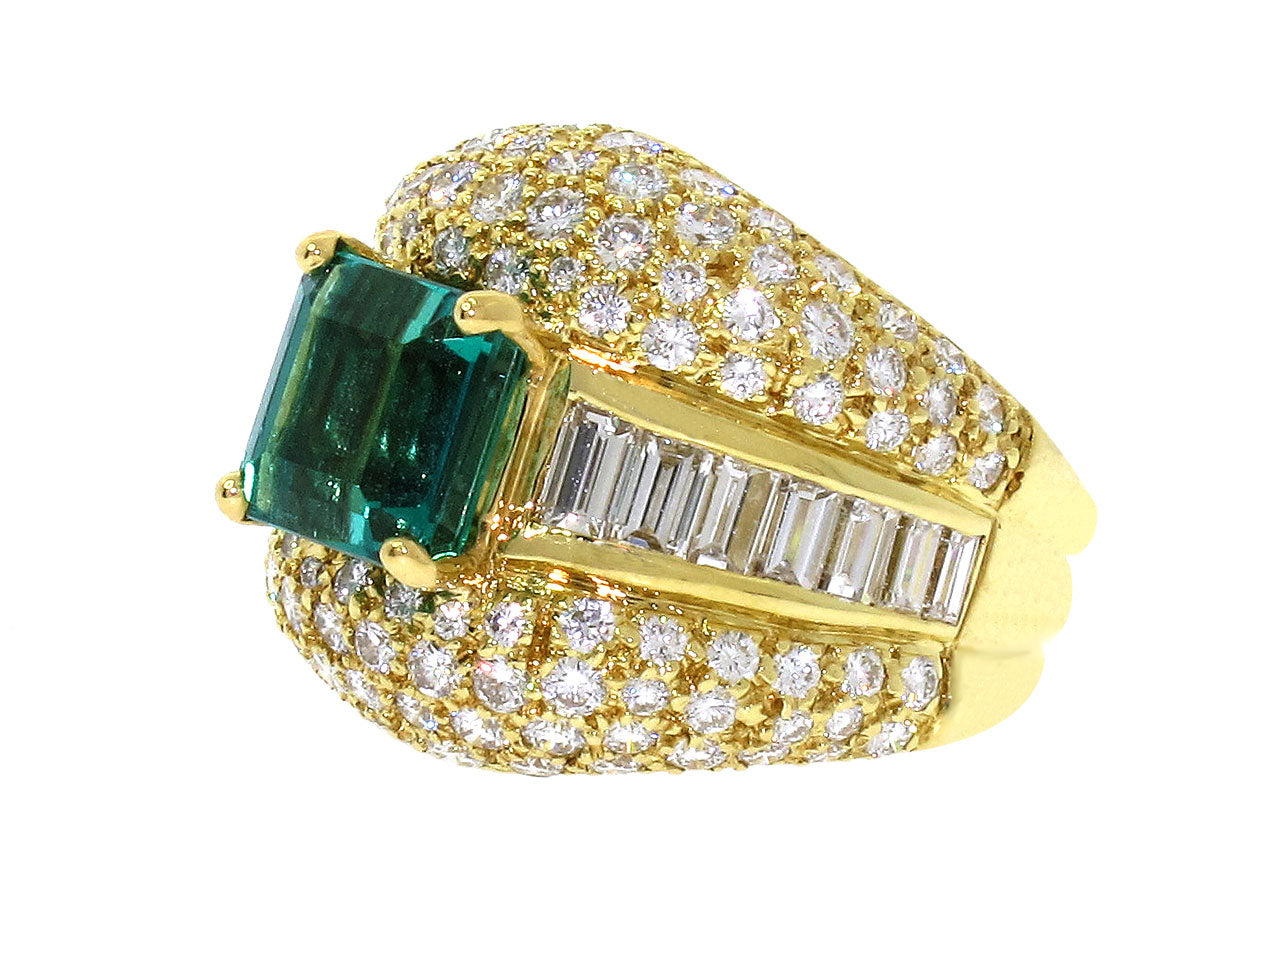 Hammerman Brothers Emerald and Diamond Ring in 18K